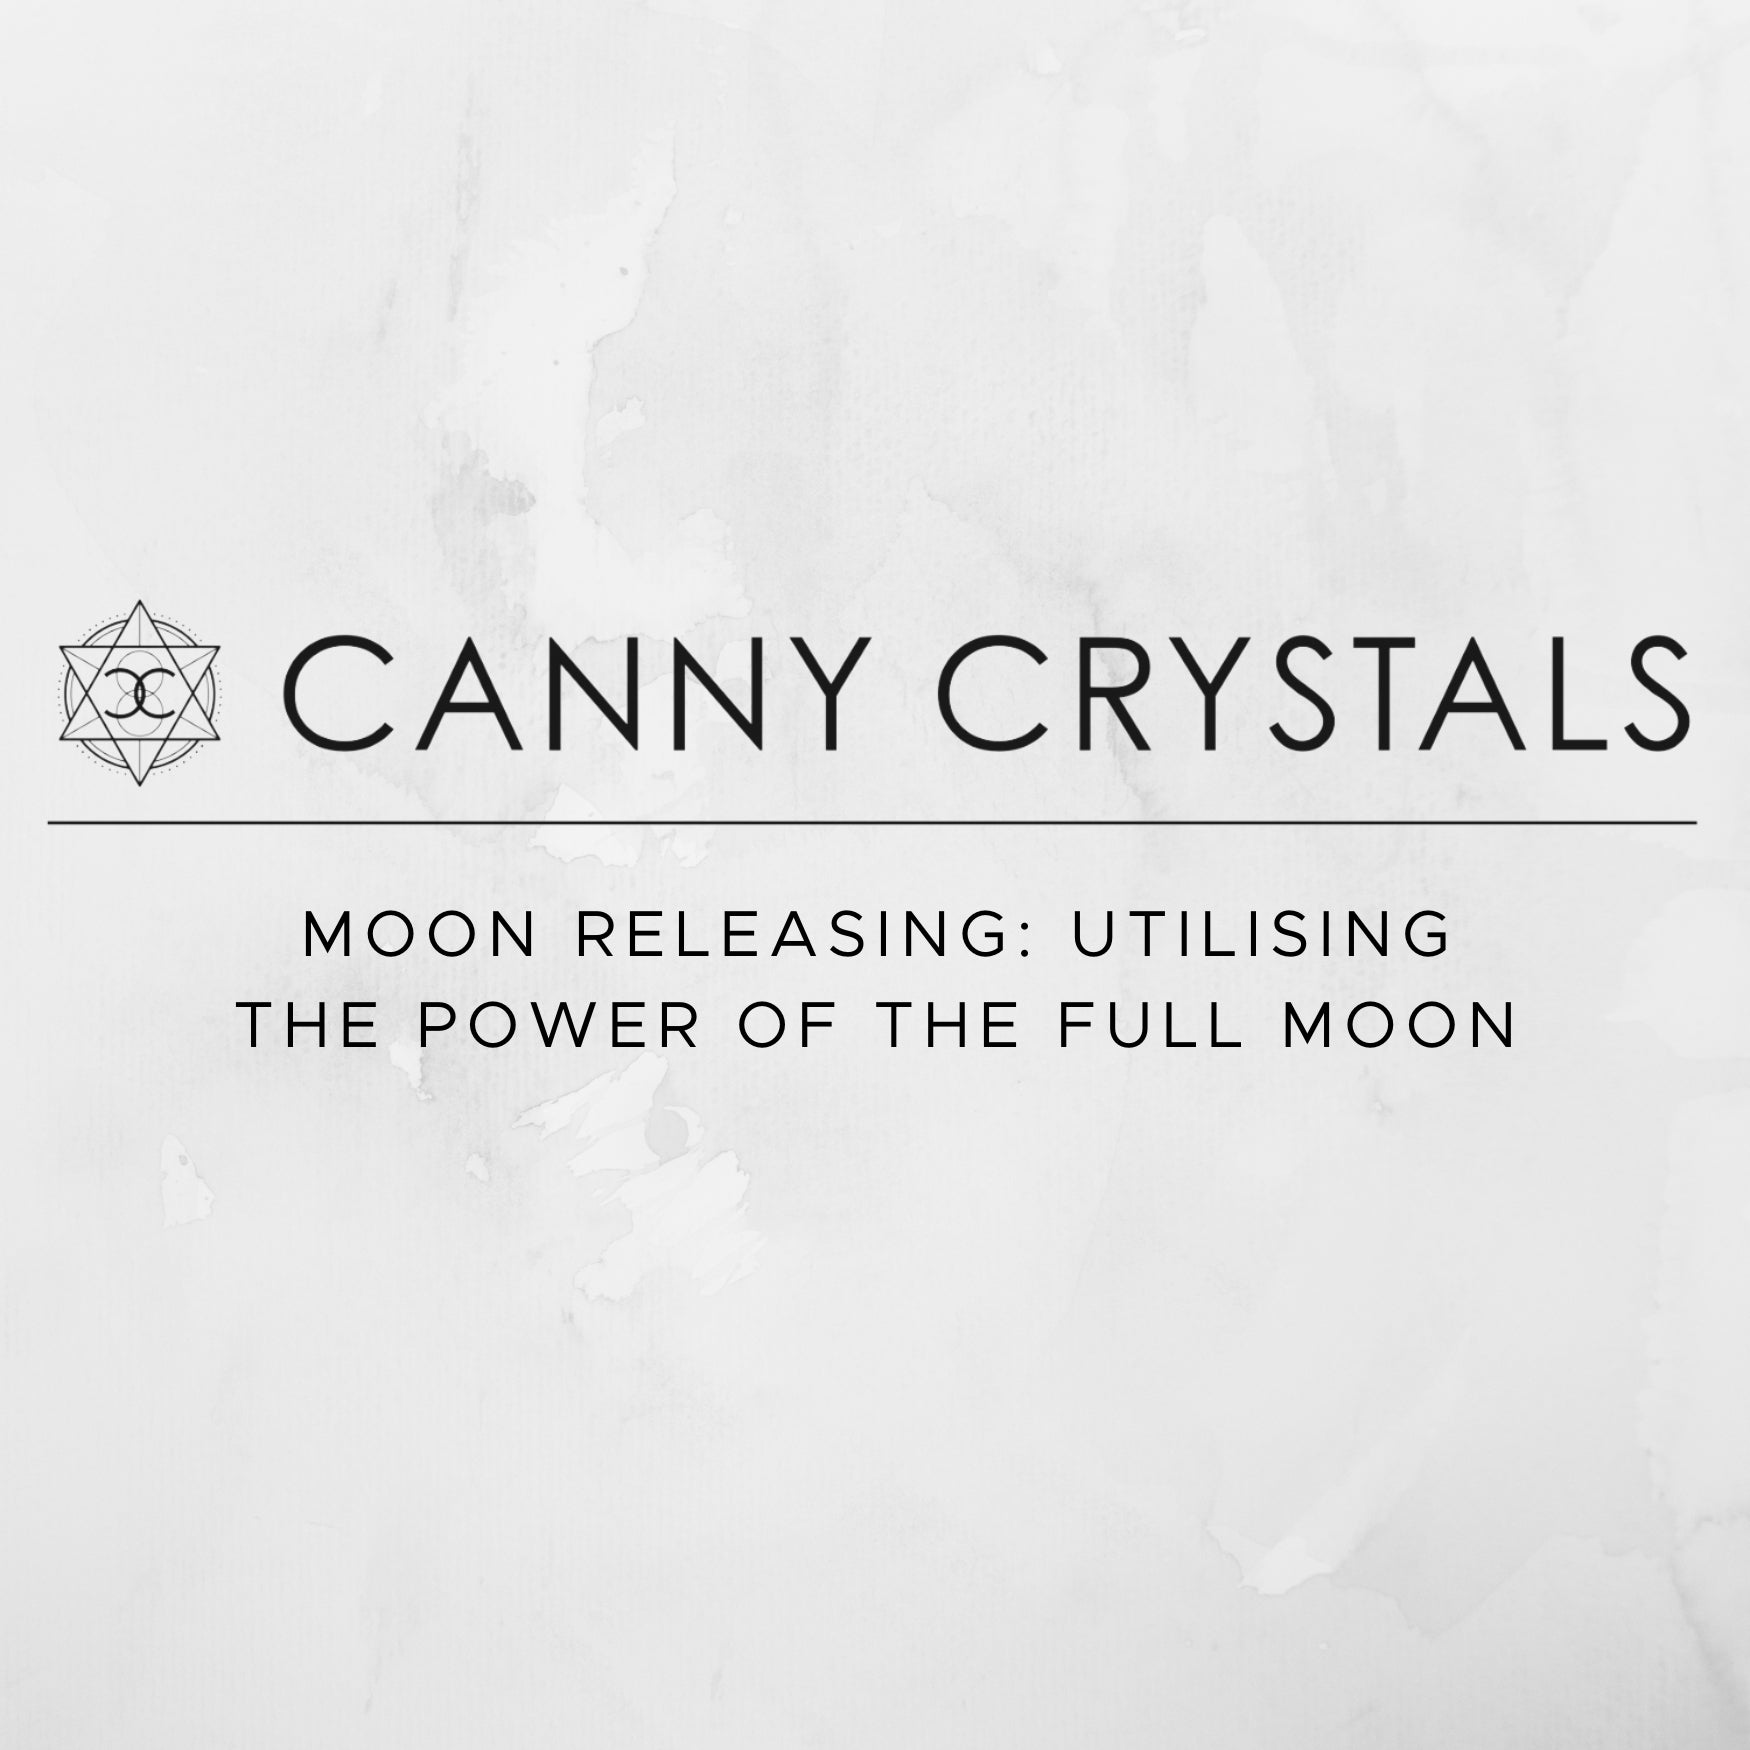 Moon releasing: Utilising the power of the full moon